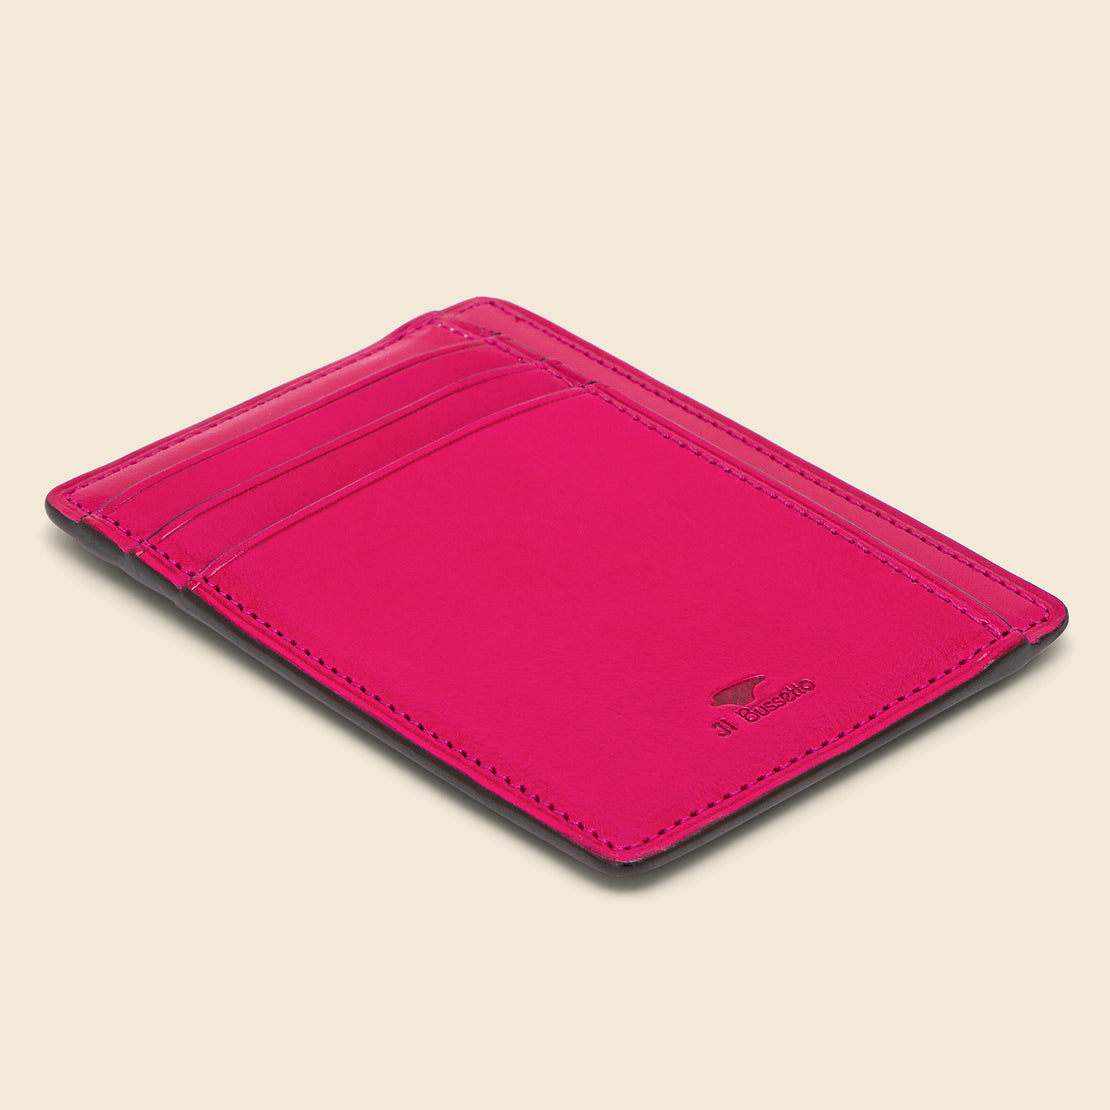 Card and Document Case - Fuchsia - Il Bussetto - STAG Provisions - Accessories - Wallets